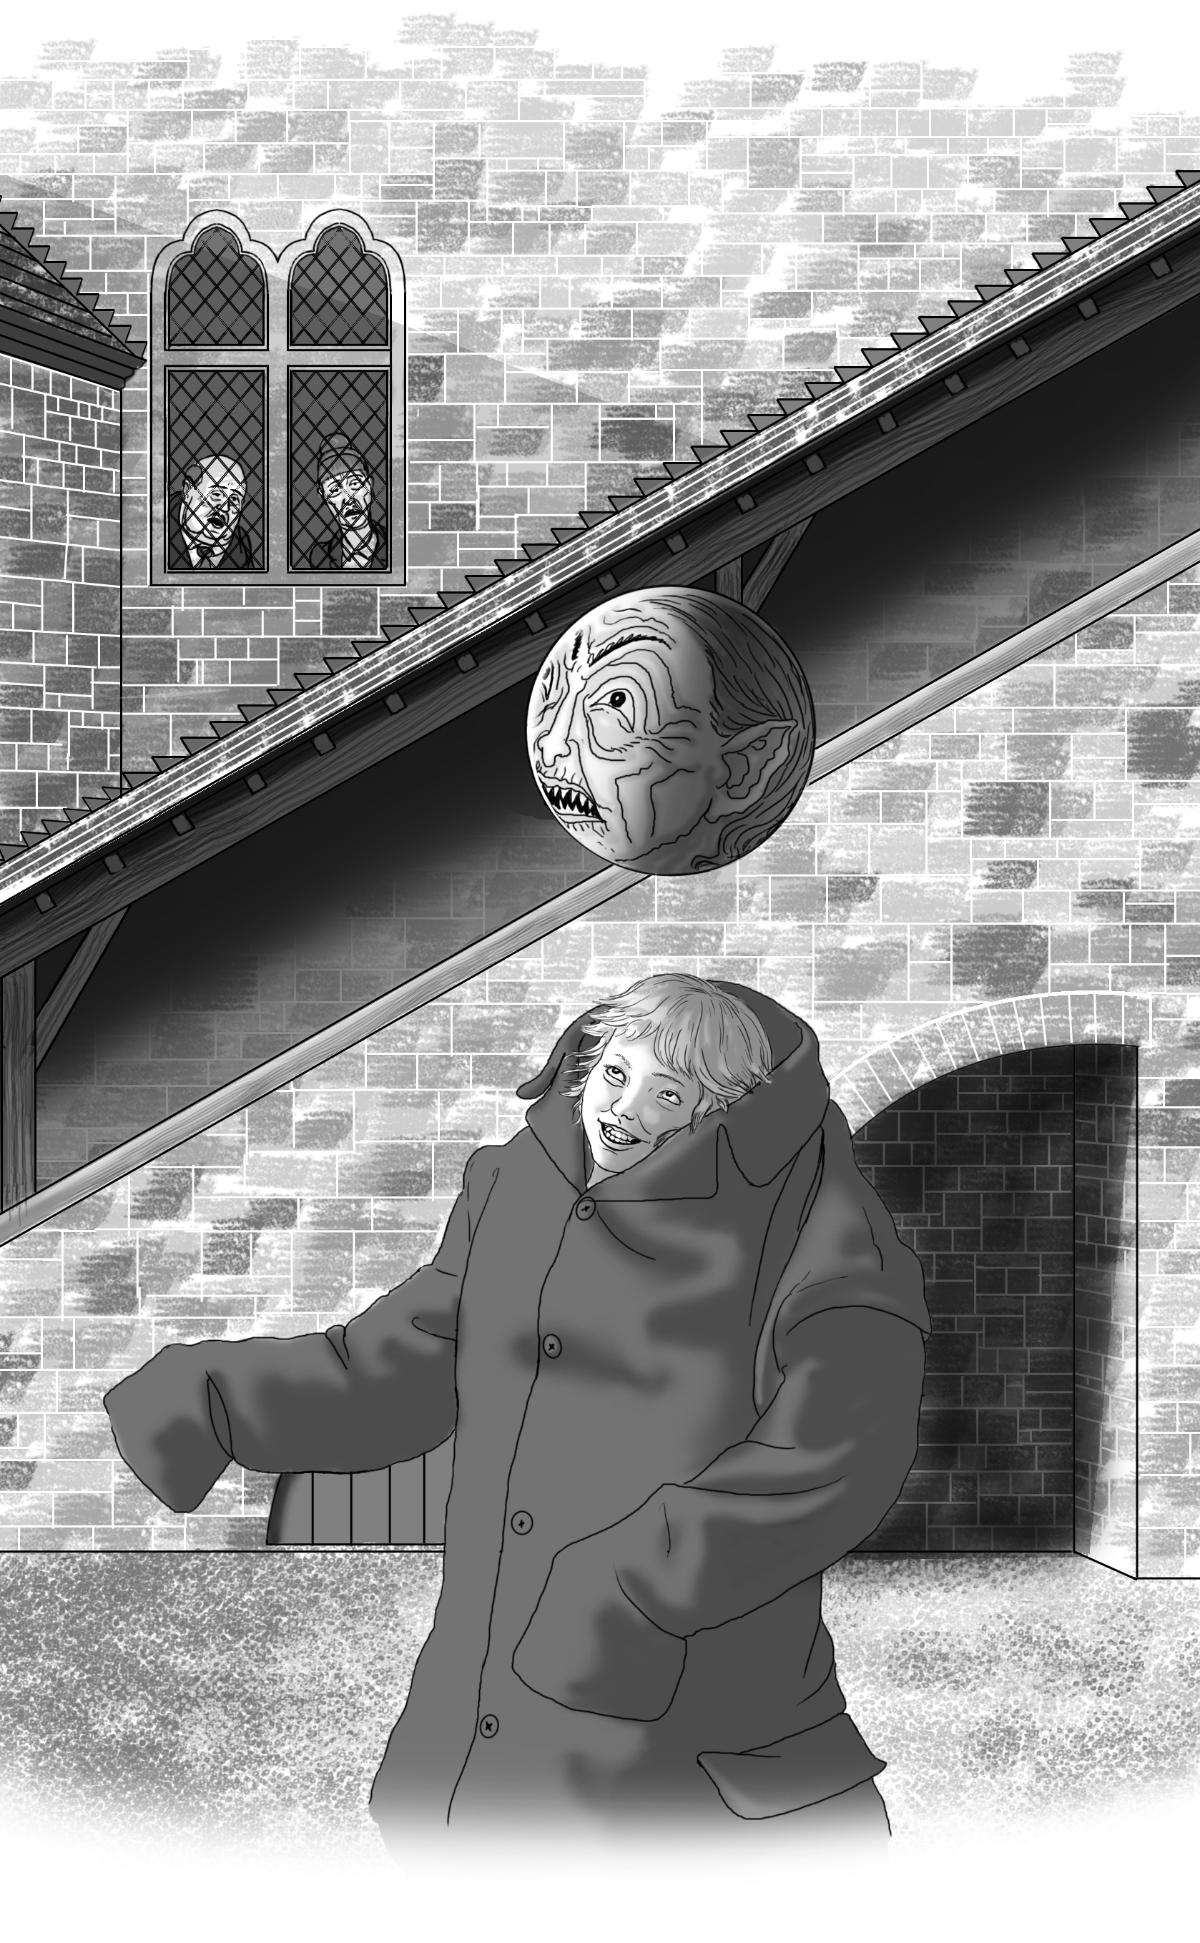 Illustration of a child in a large coat being looked at by two adults through a window.